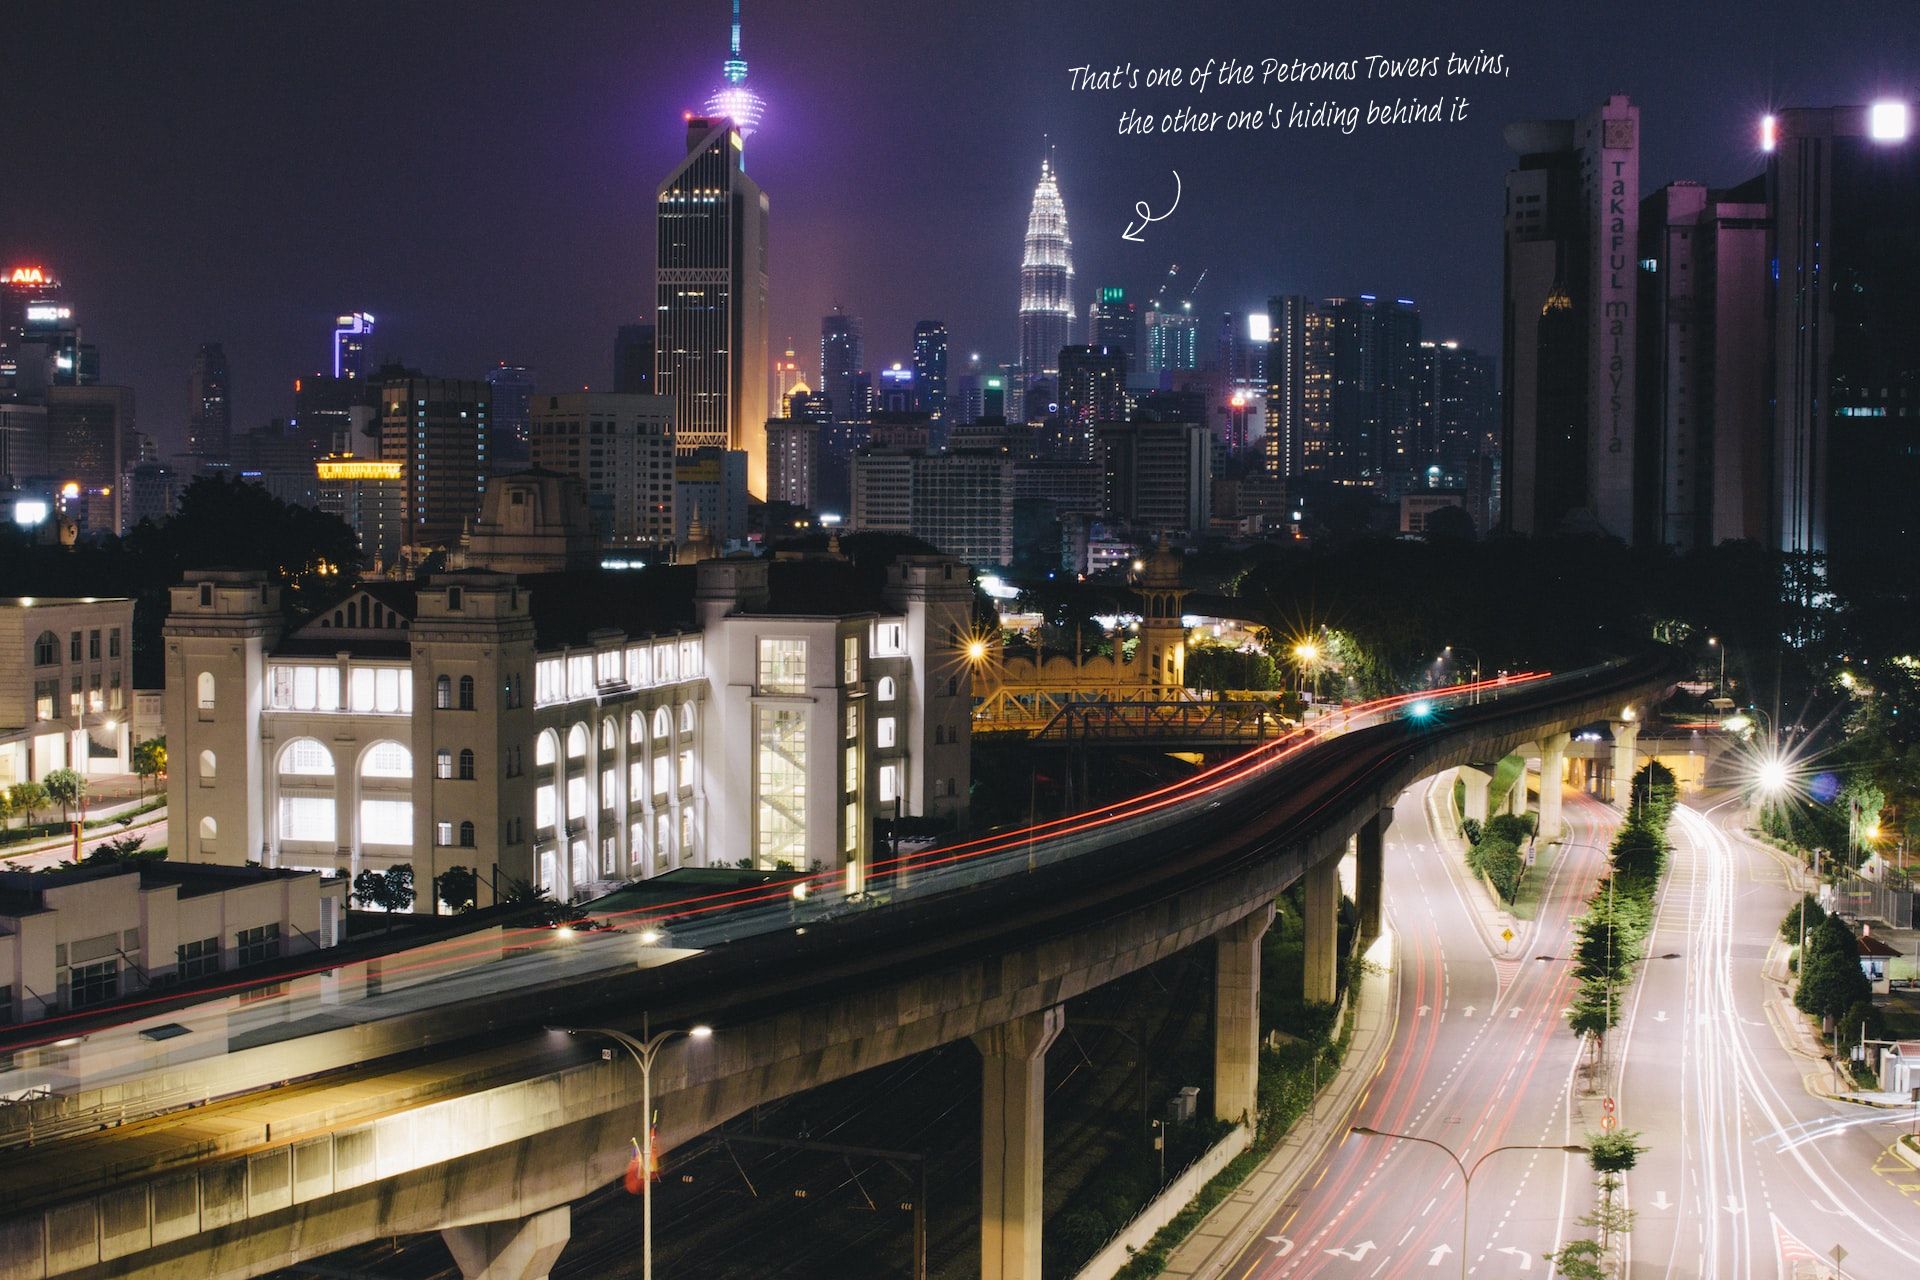 The skyline of Kuala Lumpur at night, with the KL Monorail in the foreground and the Petronas Towers glowing in the far.